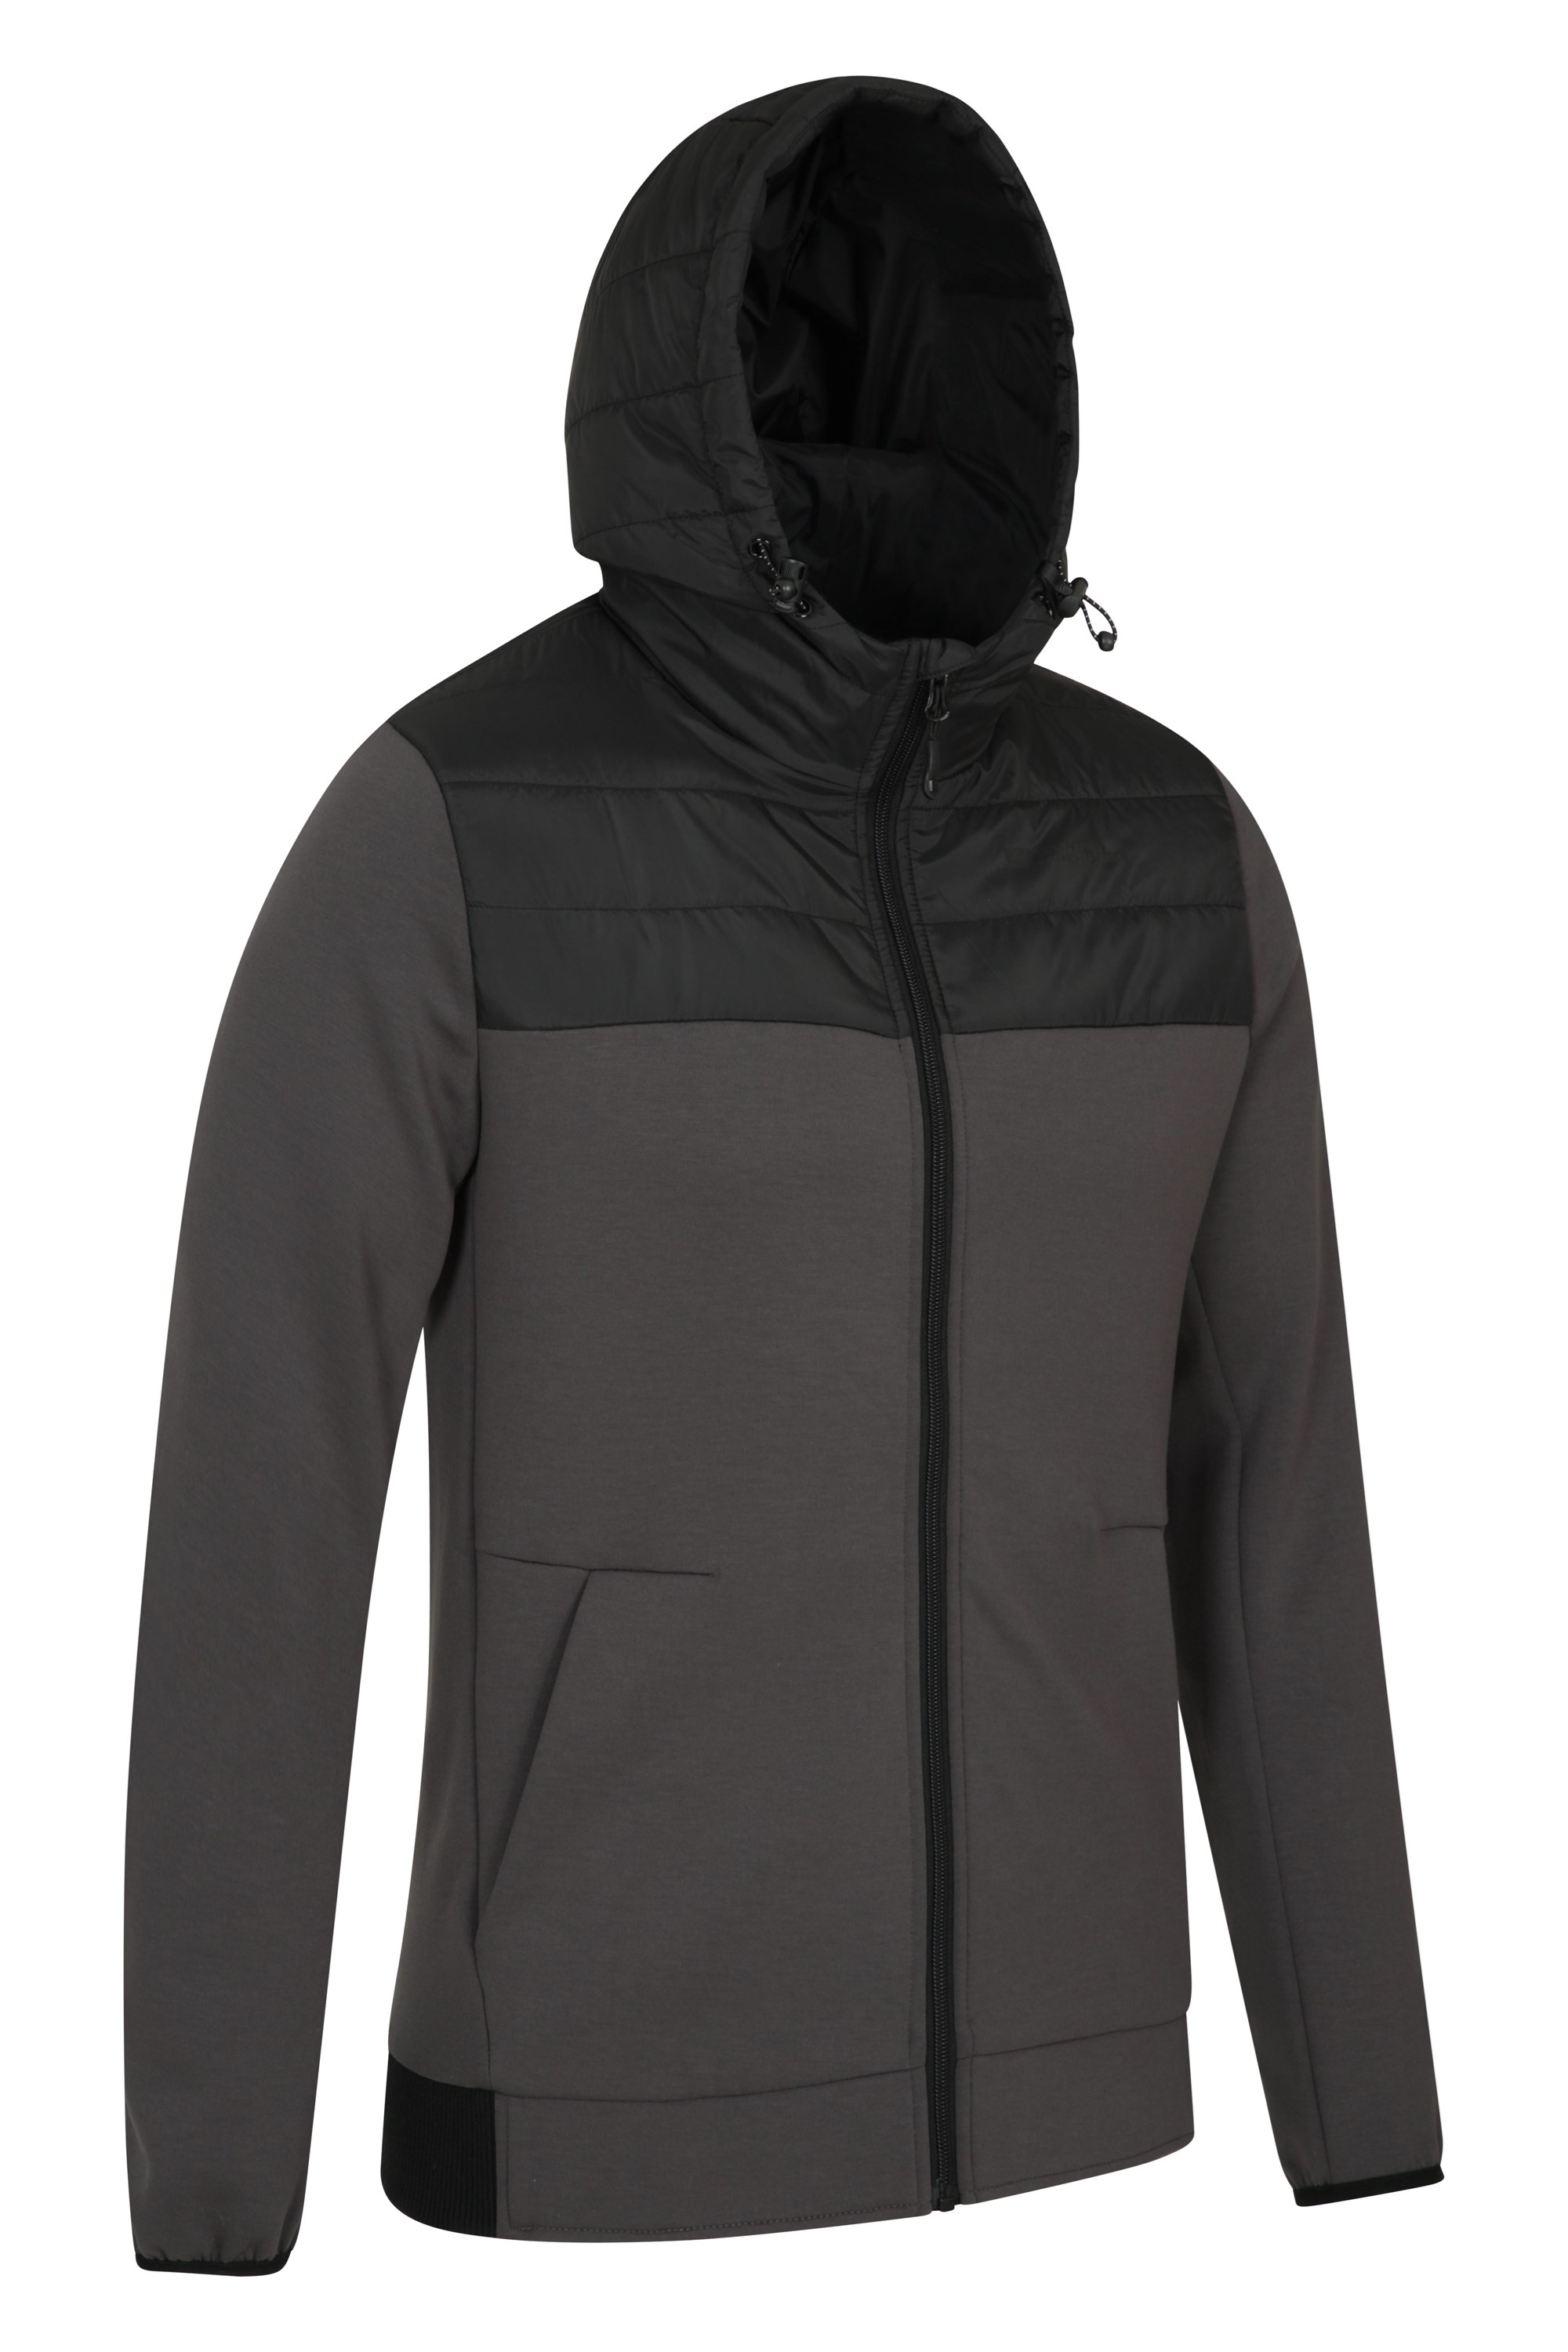 Mountain Warehouse Ascent Mens Padded Hoodie Microfibre Zip Pockets DWR 